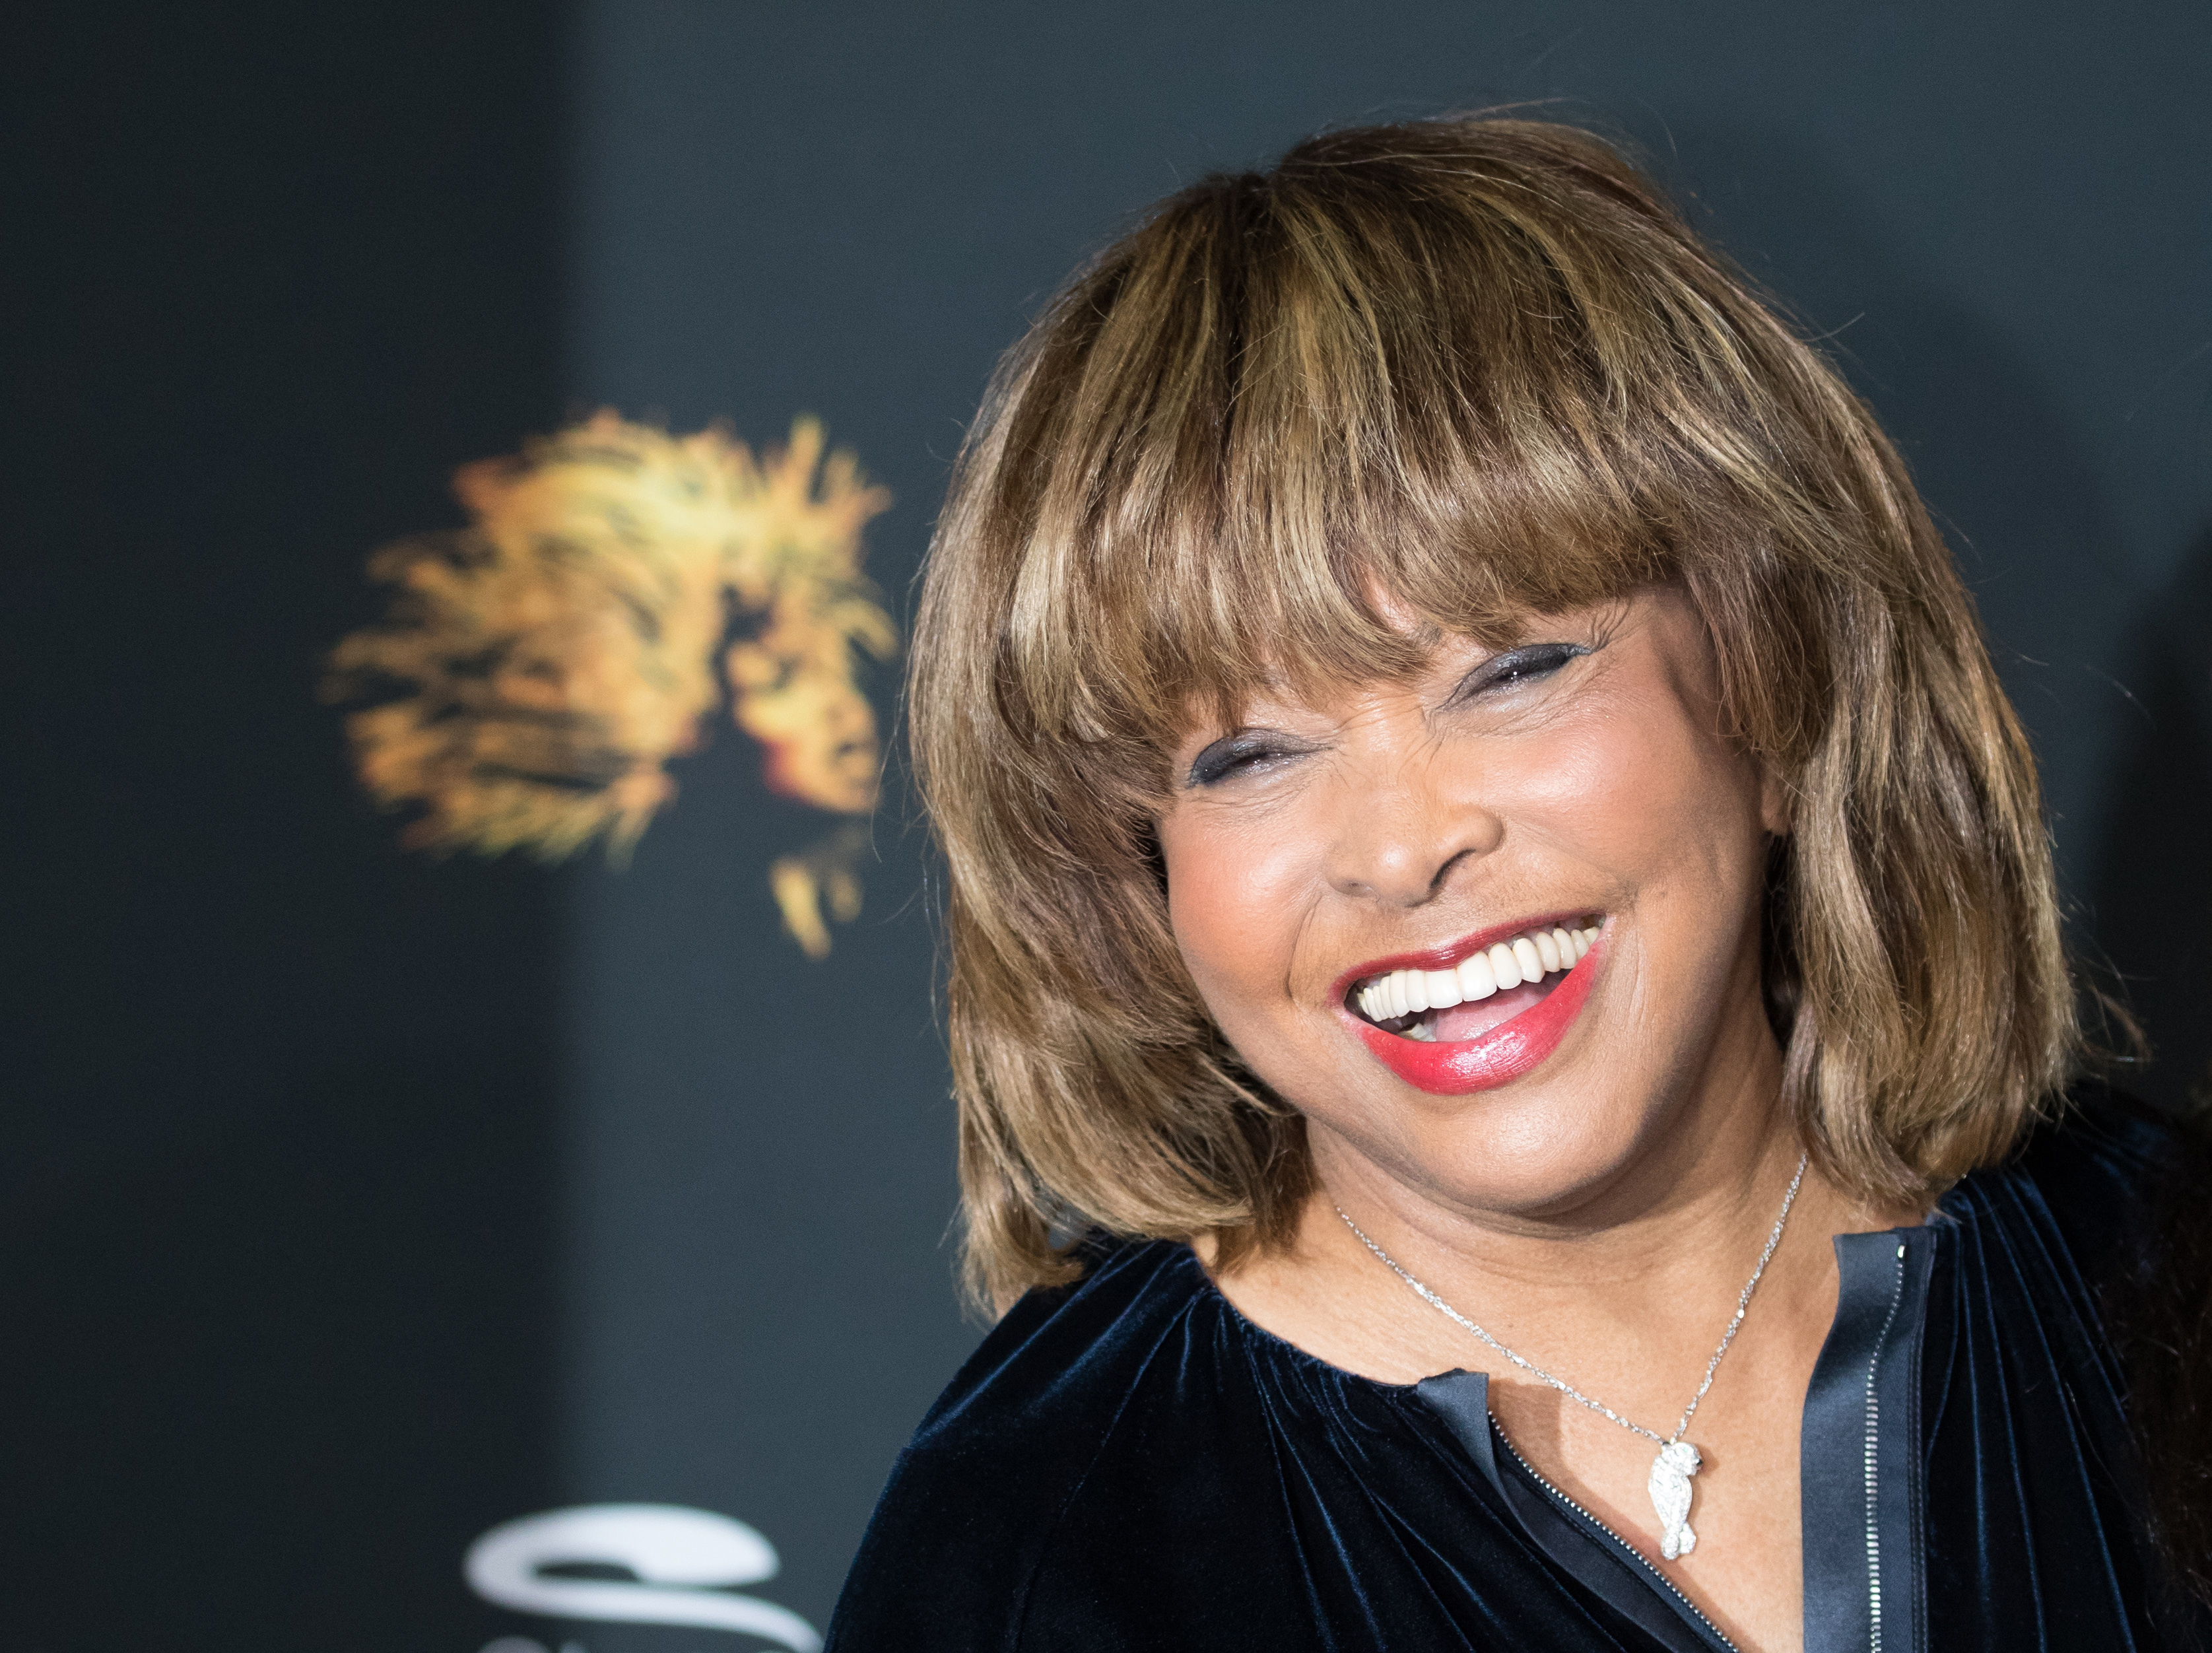 Tina Turner during a photo shoot for the musical "Tina - The Tina Turner Musical" on October 23, 2018, in Hamburg | Source: Getty Images